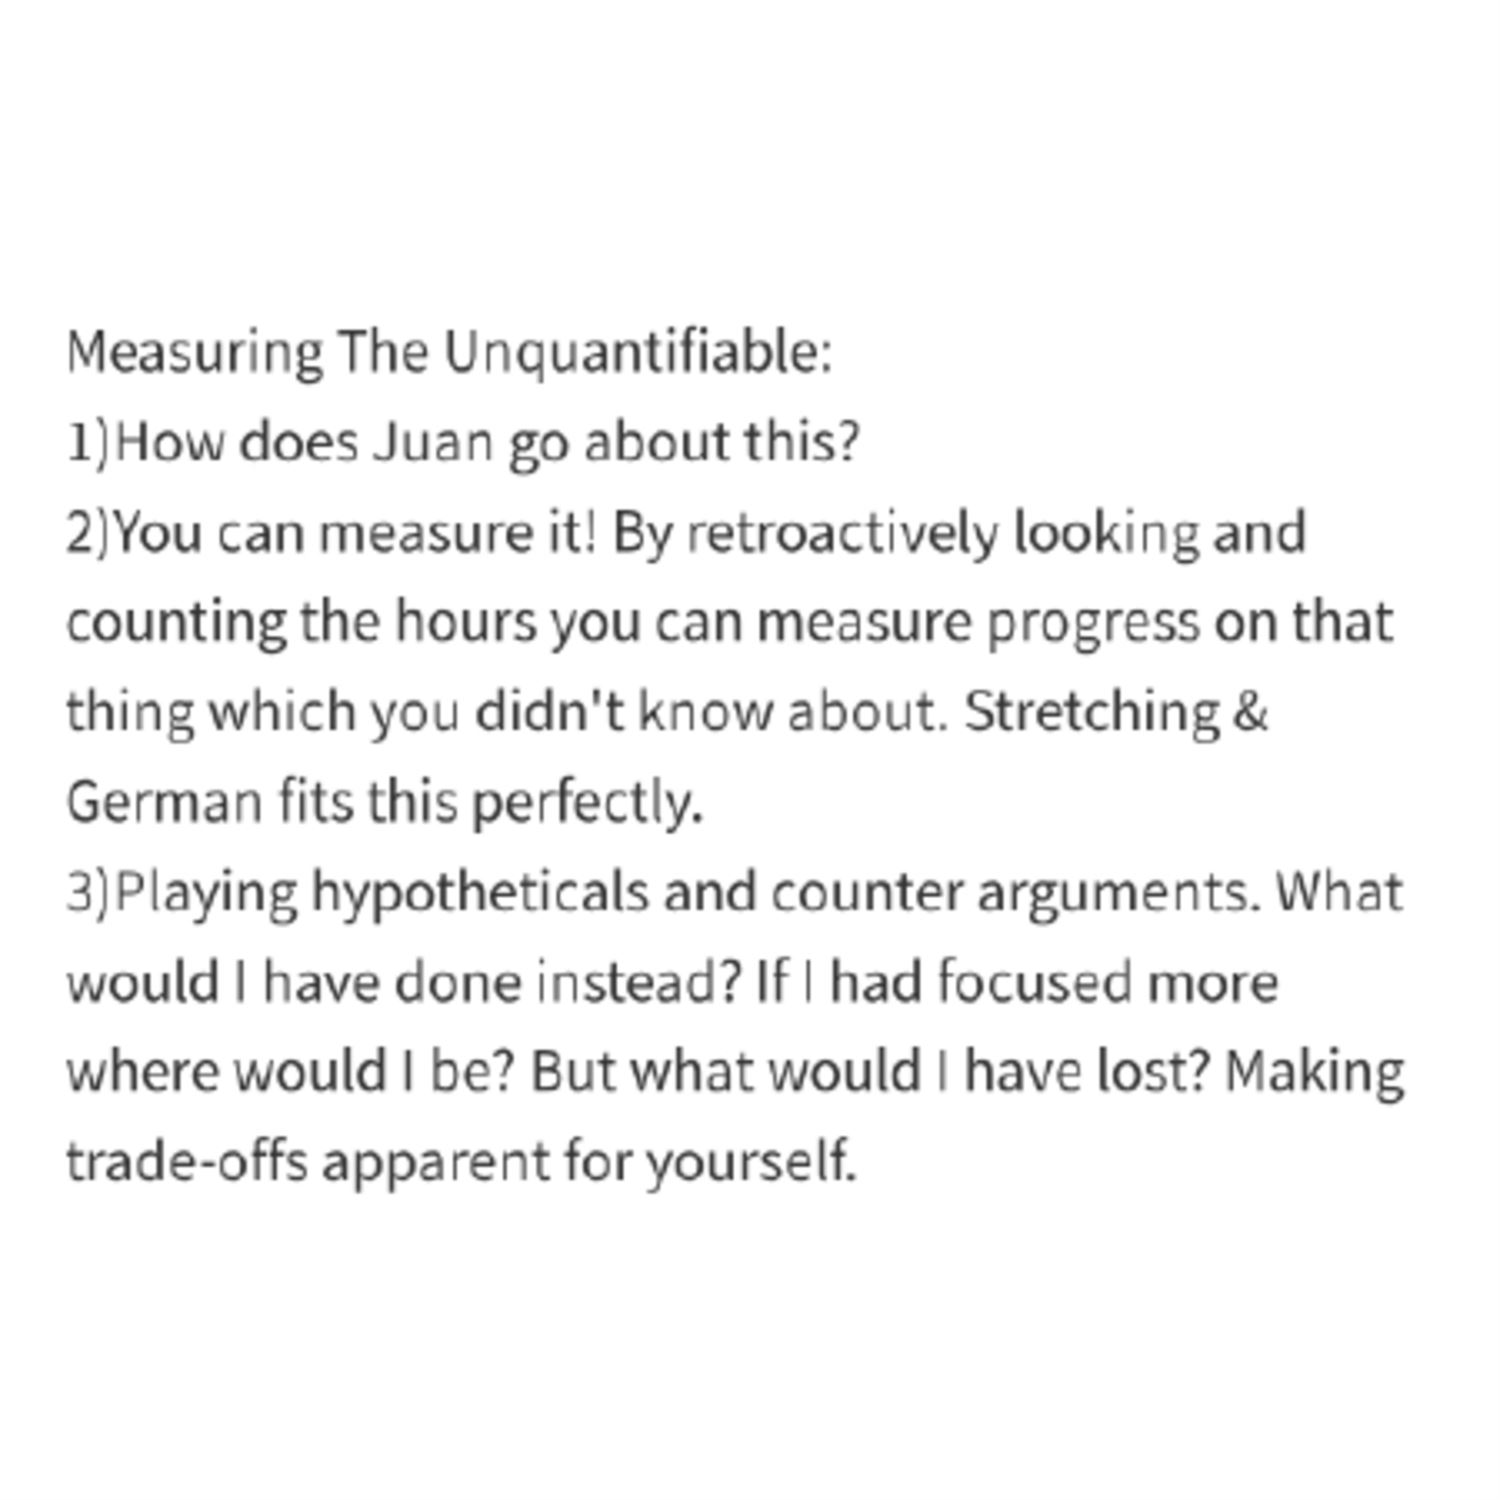 Measuring the unquantifiable